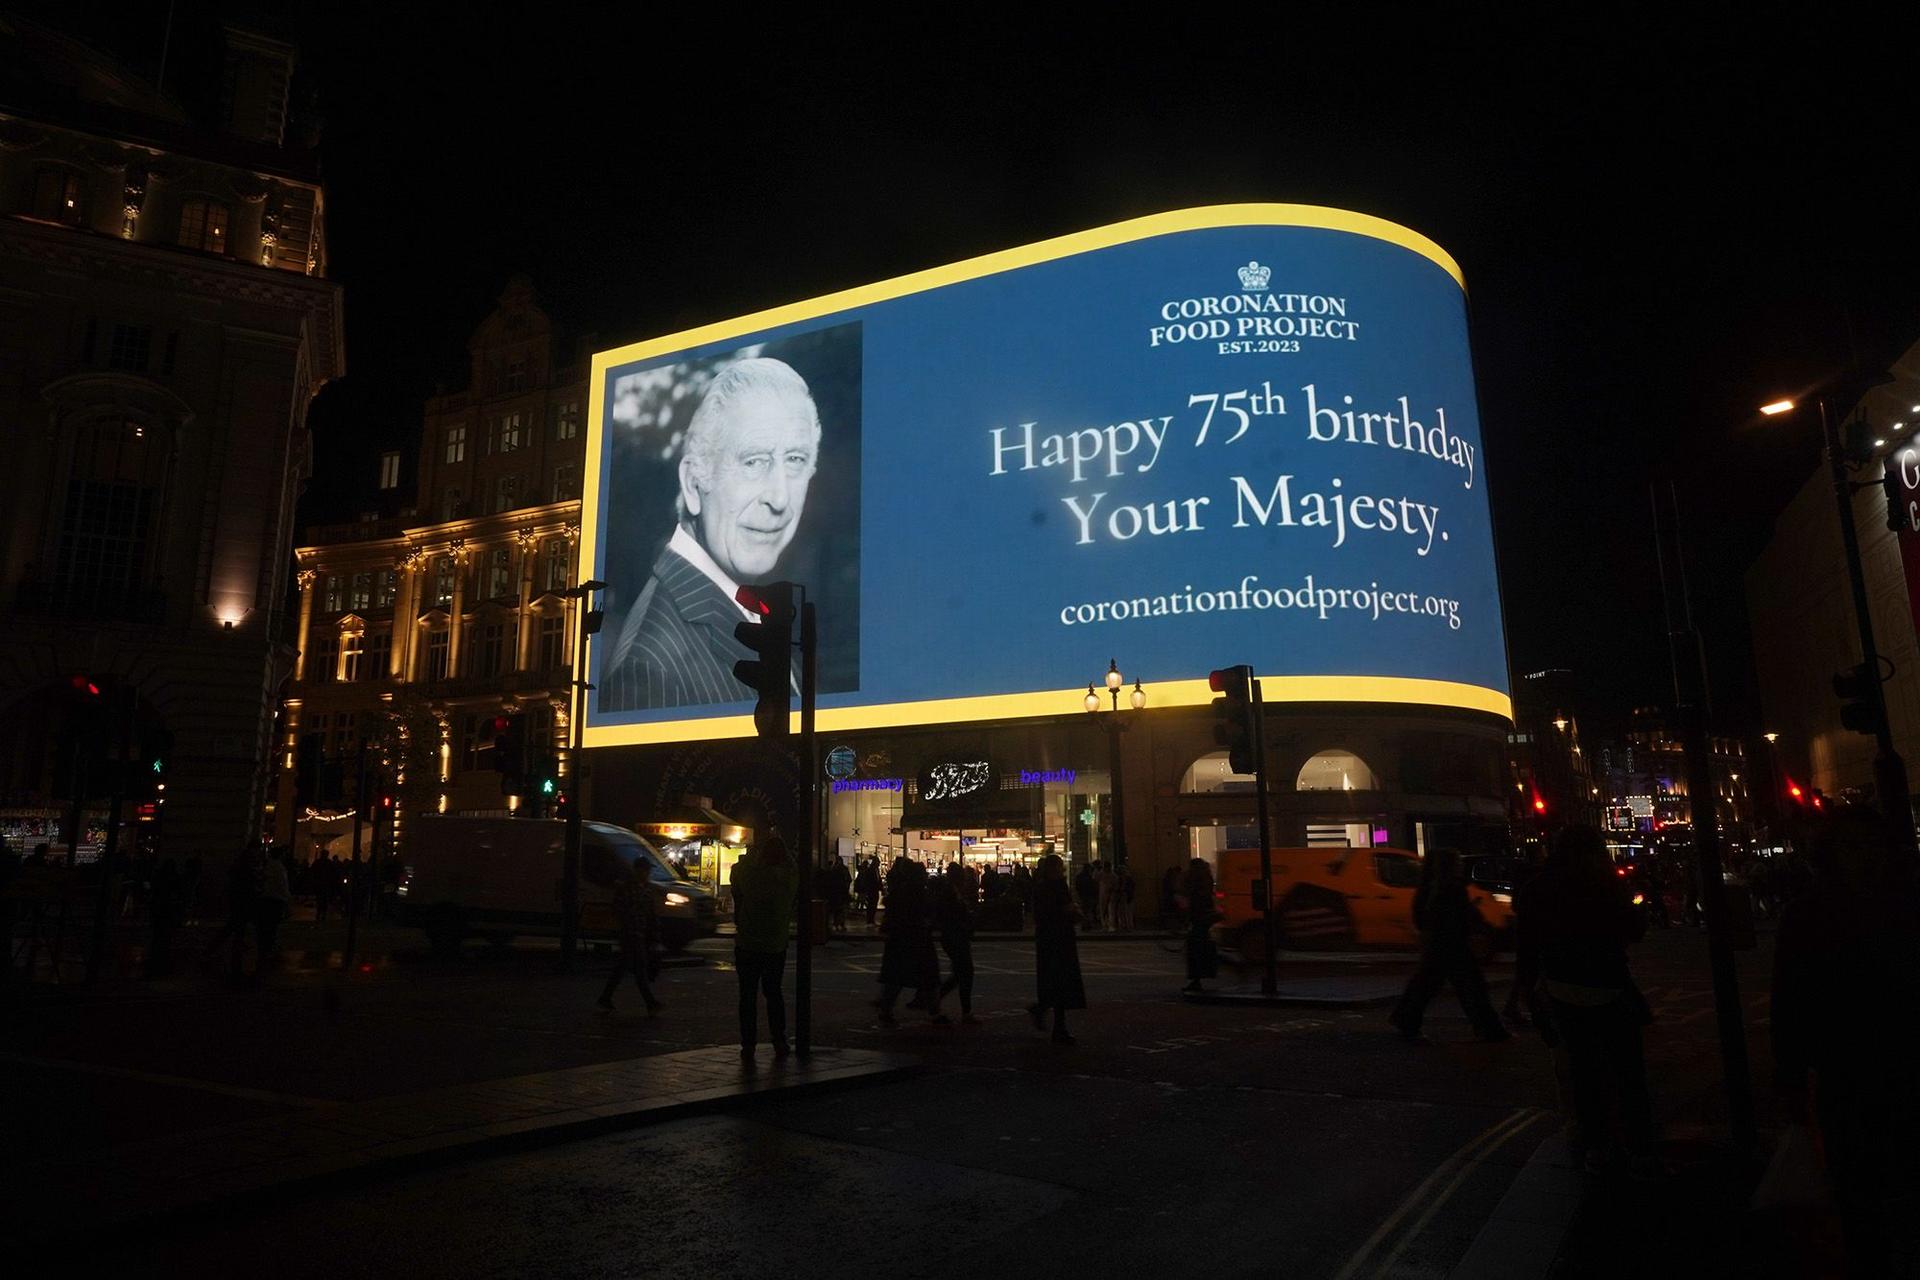 The illuminated billboard at Piccadilly Circus displays a message to mark the monarch's milestone birthday. 